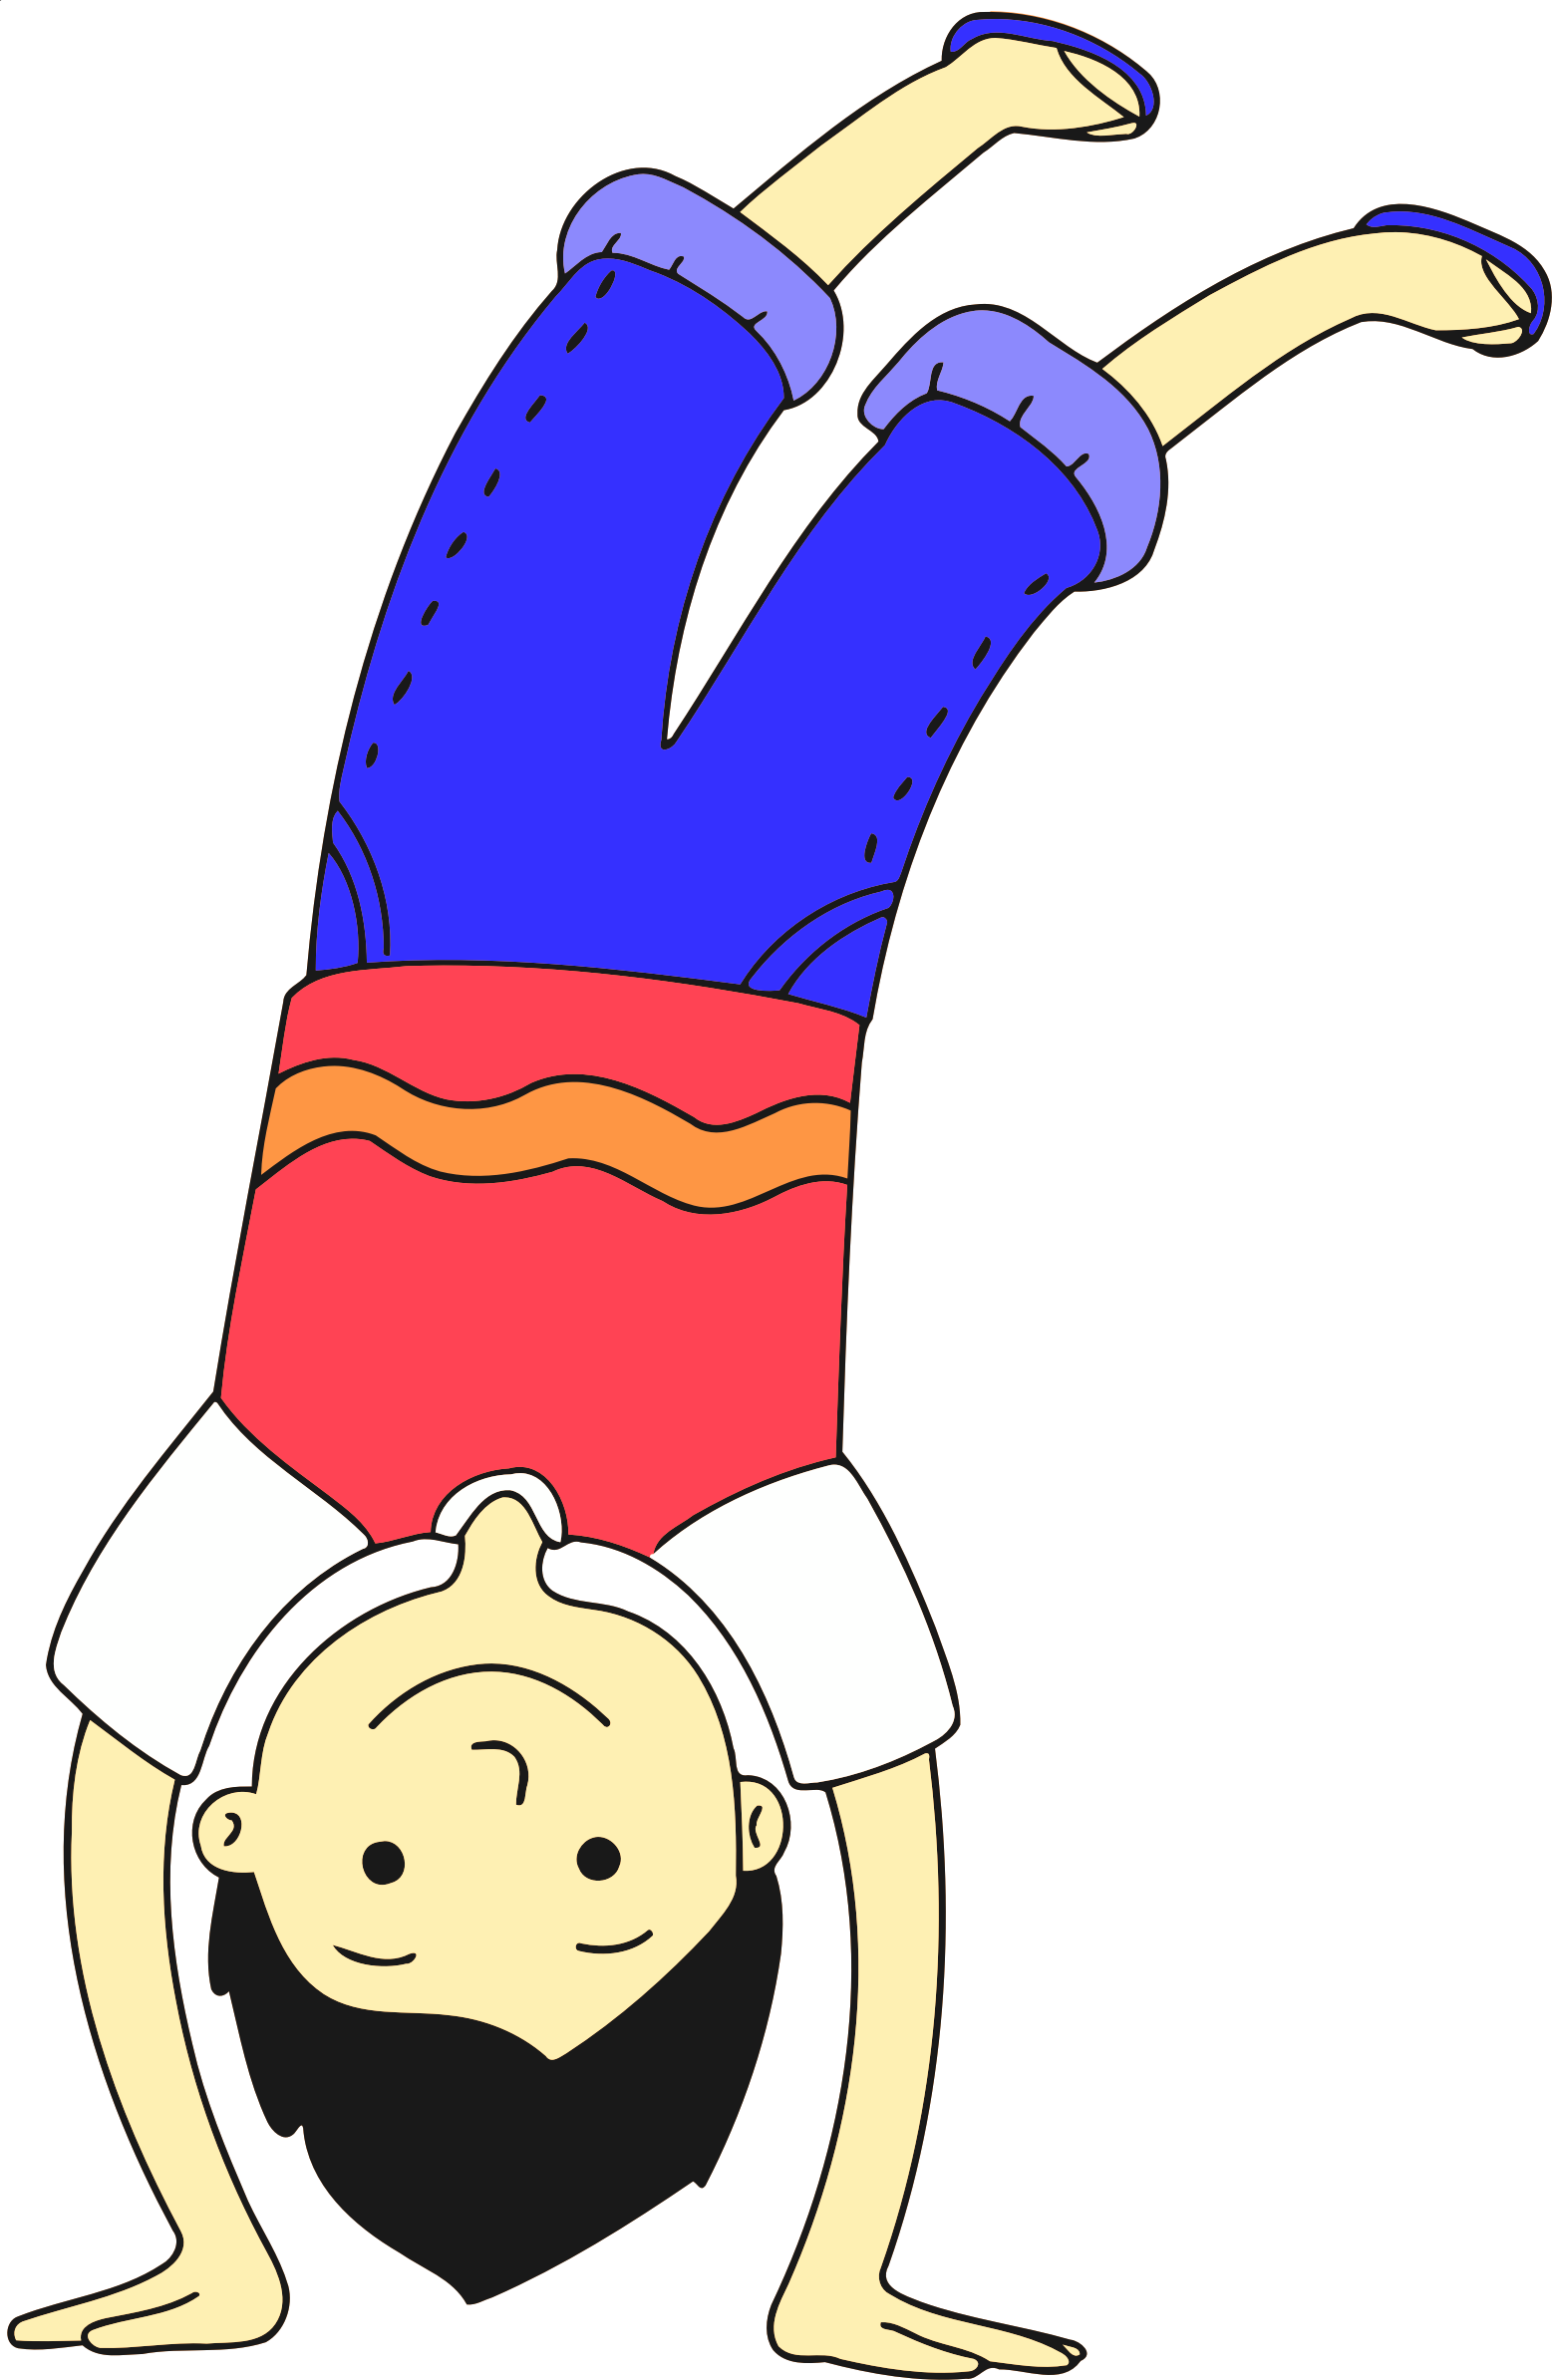 Clip Arts Related To : handstand clipart. 